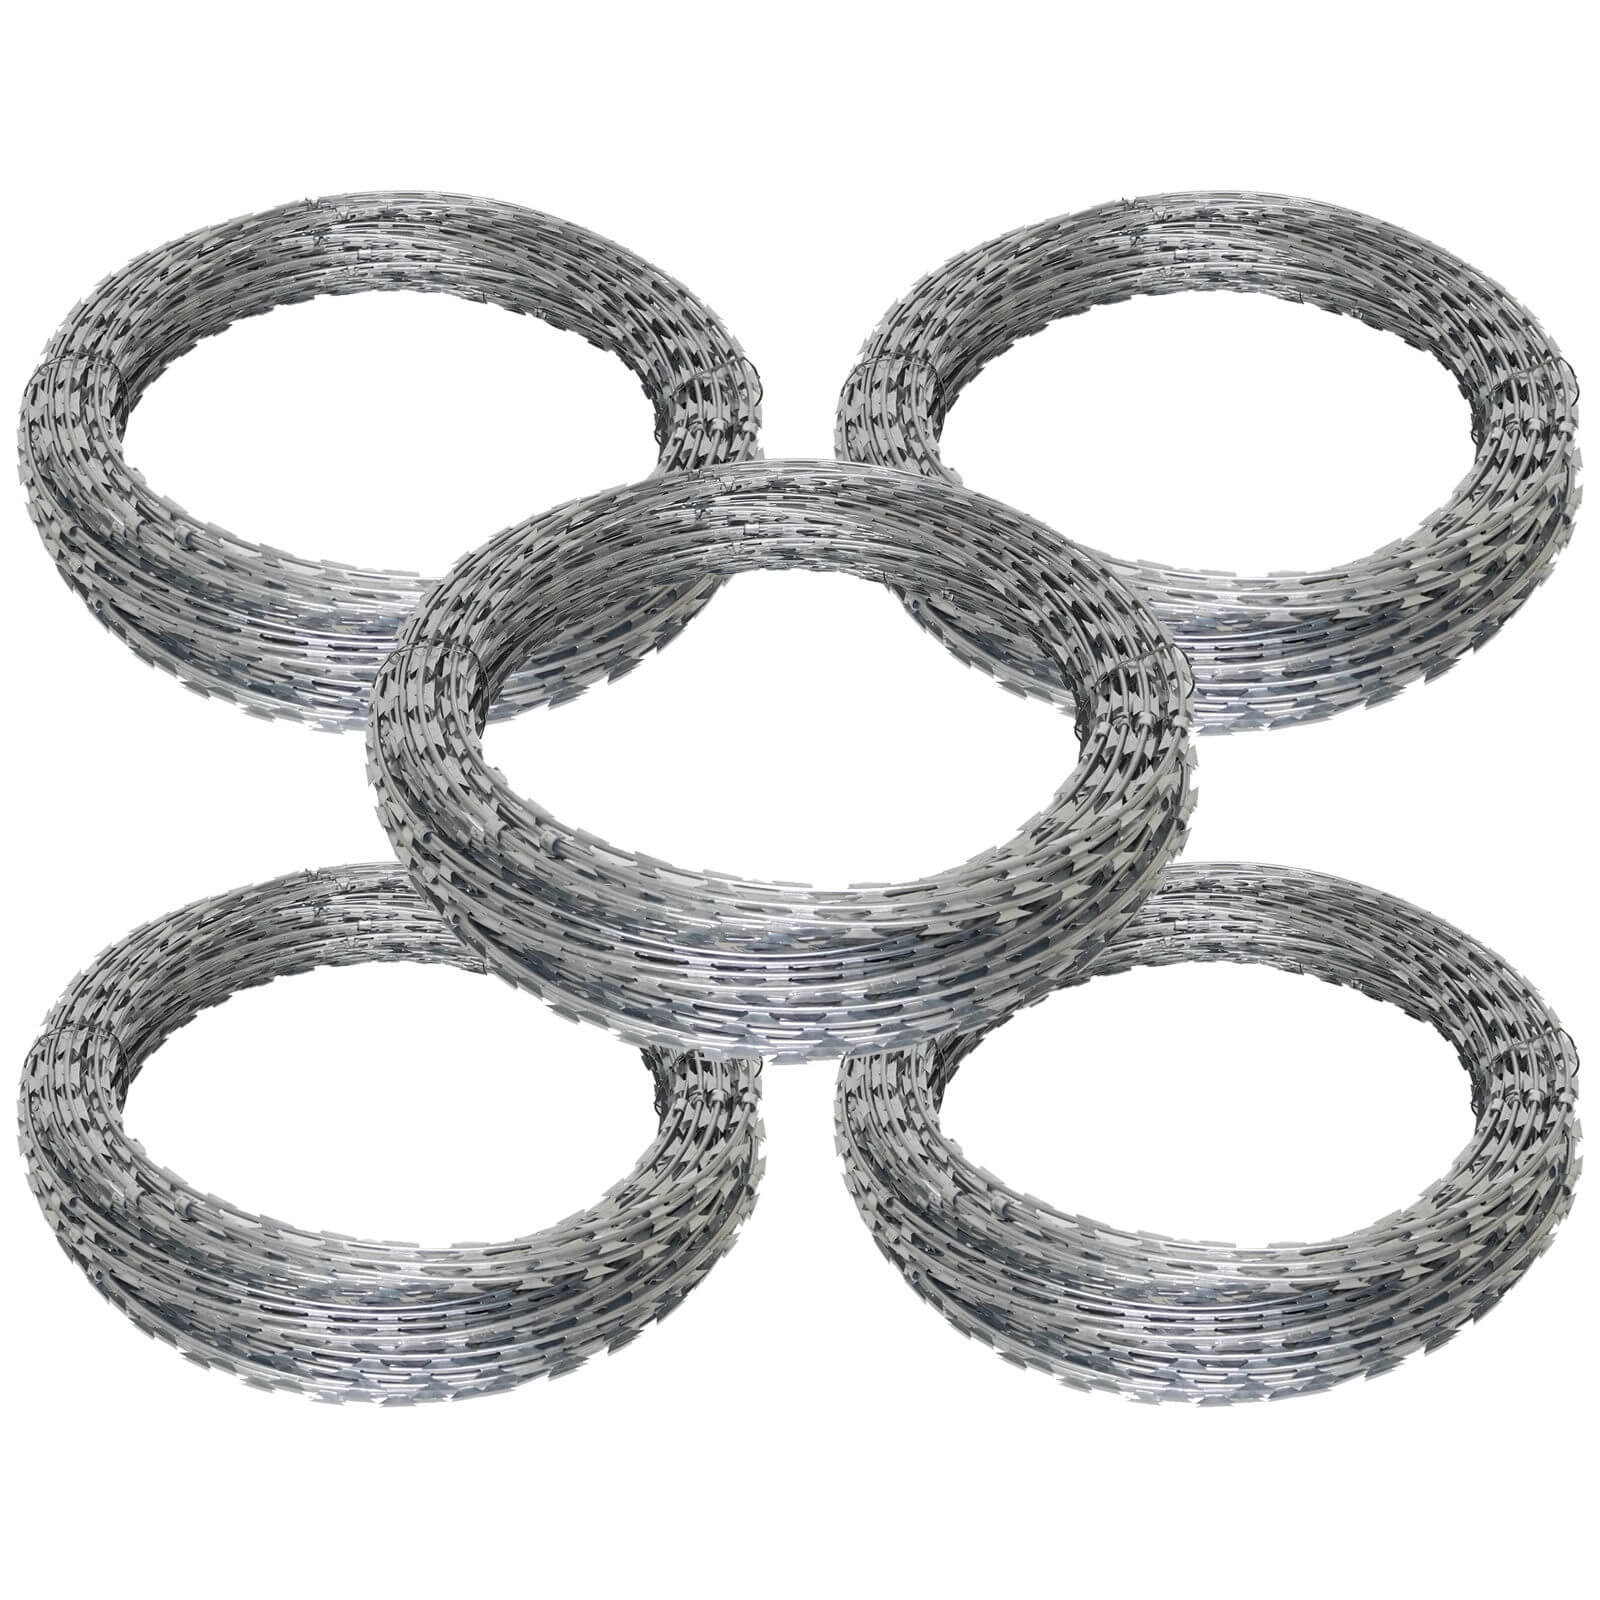 Razor Wire Fencing: A Wise Investment in Security